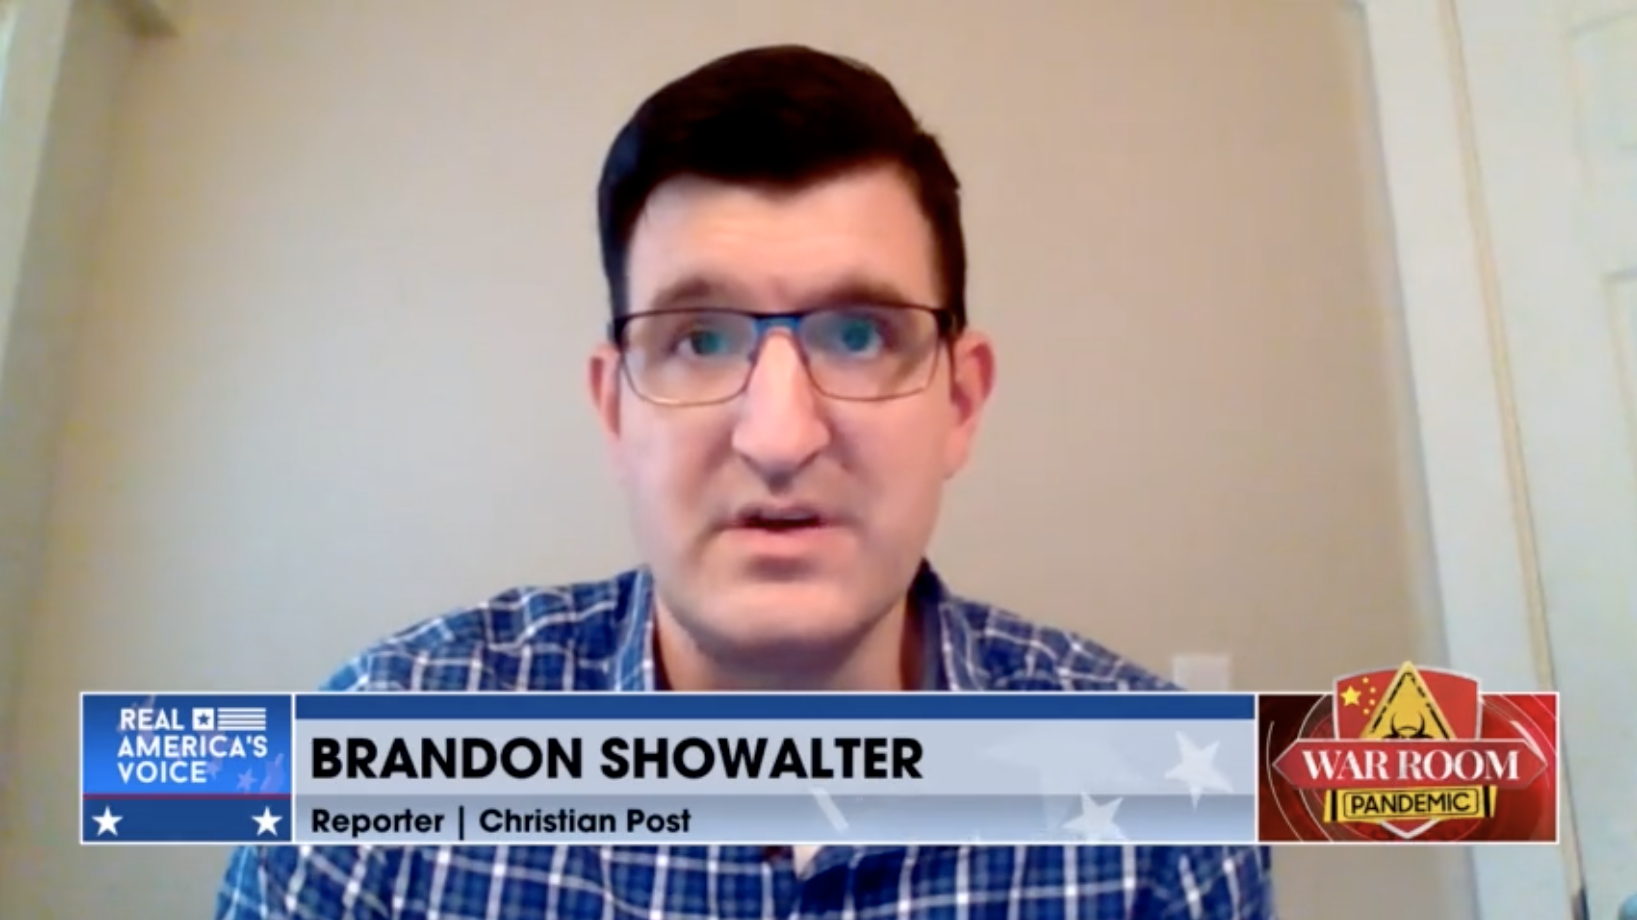 Brandon Showalter On New Special Focusing On The Medical Crime Of Transitioning Children